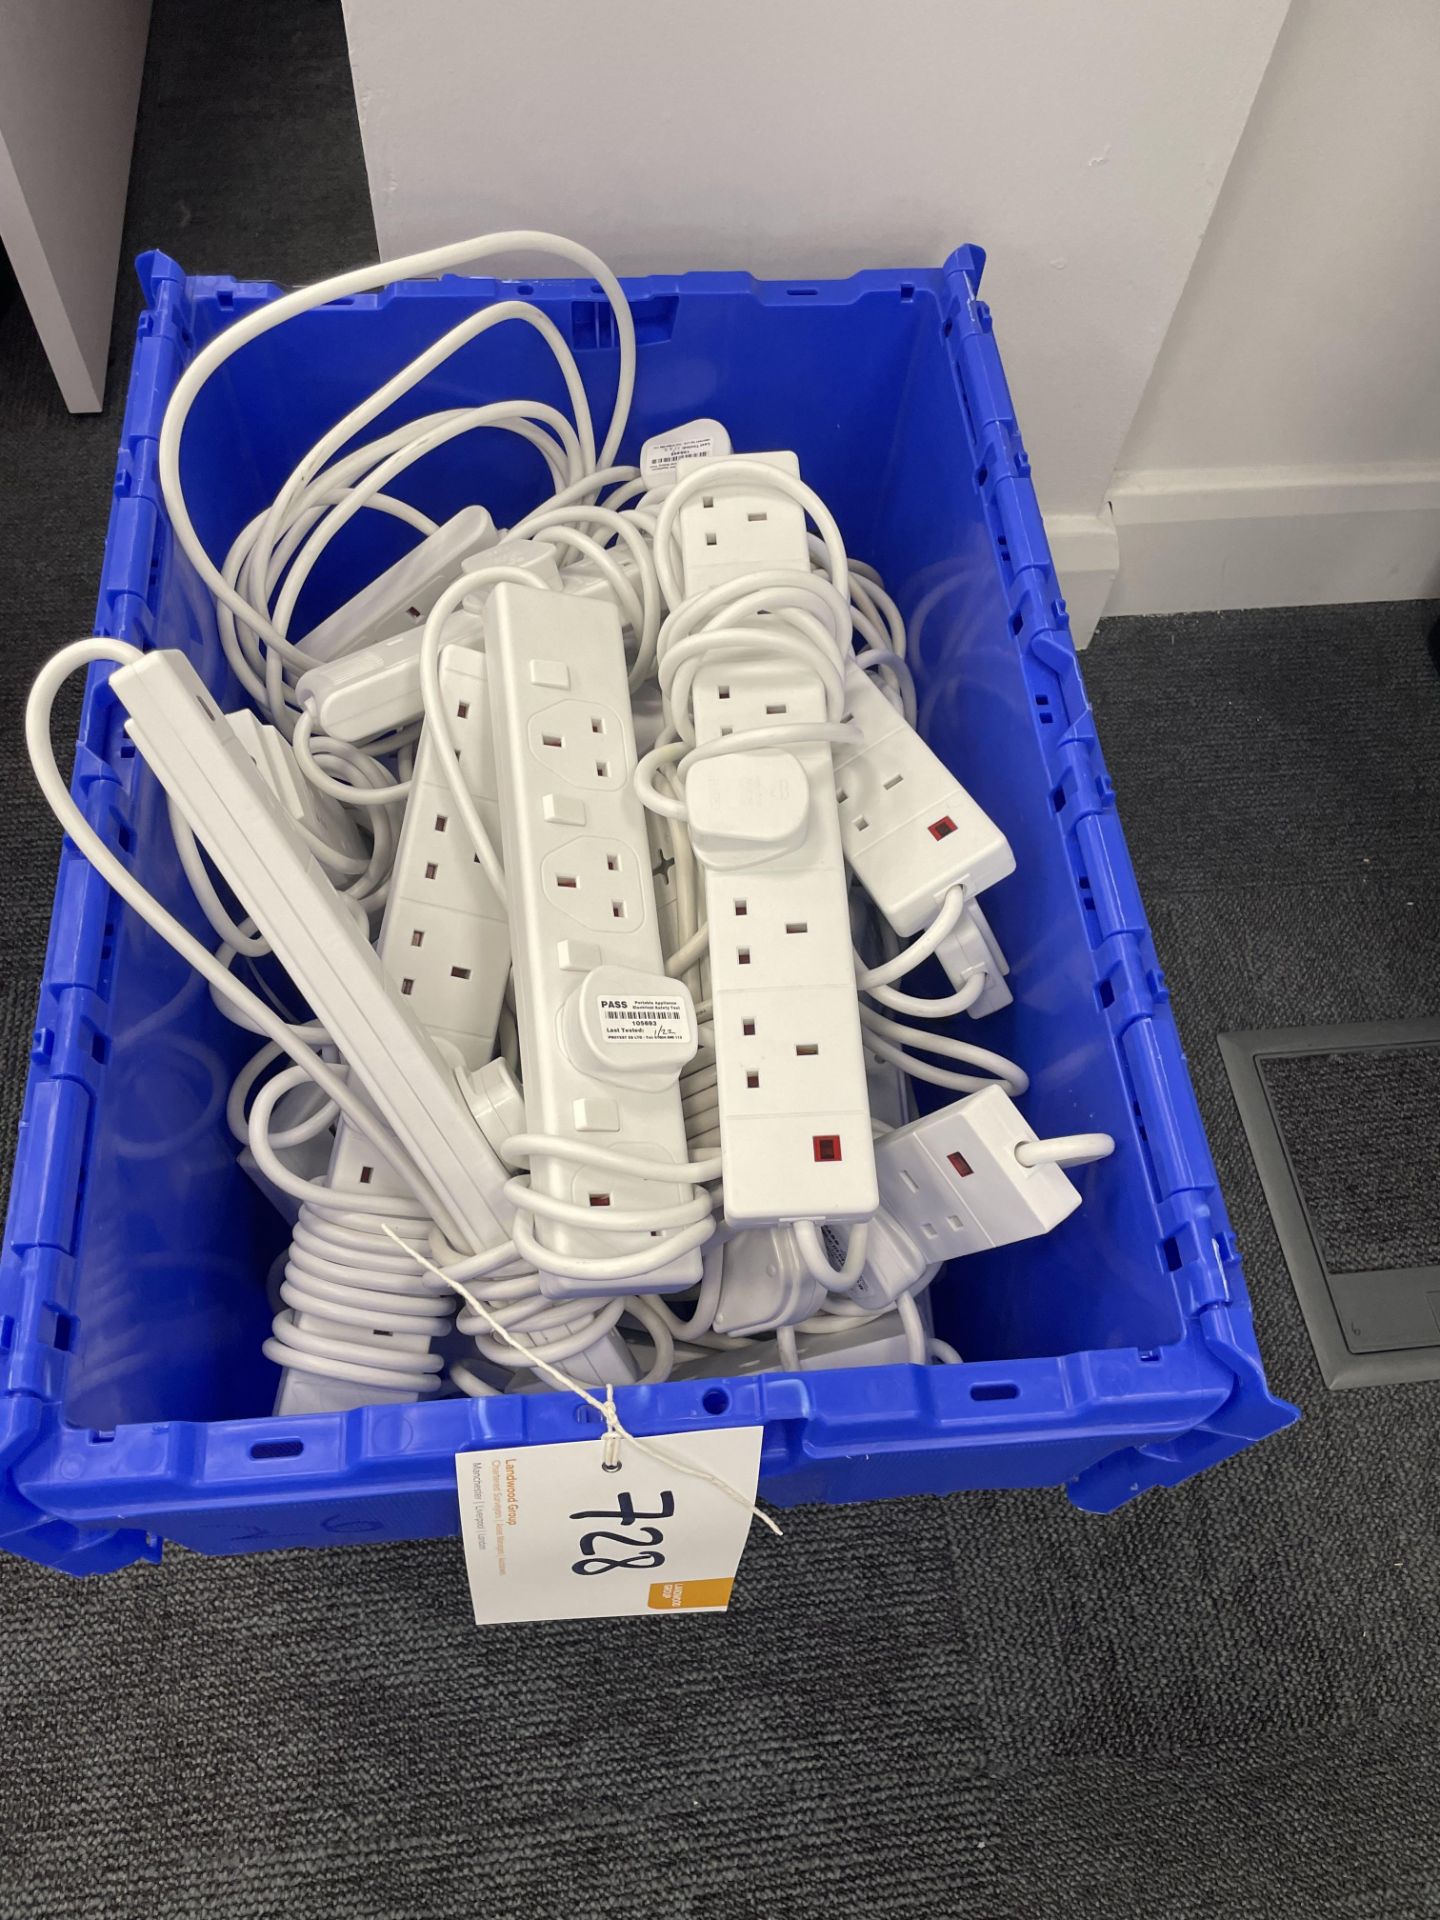 A box of assorted 240v multi sockets.